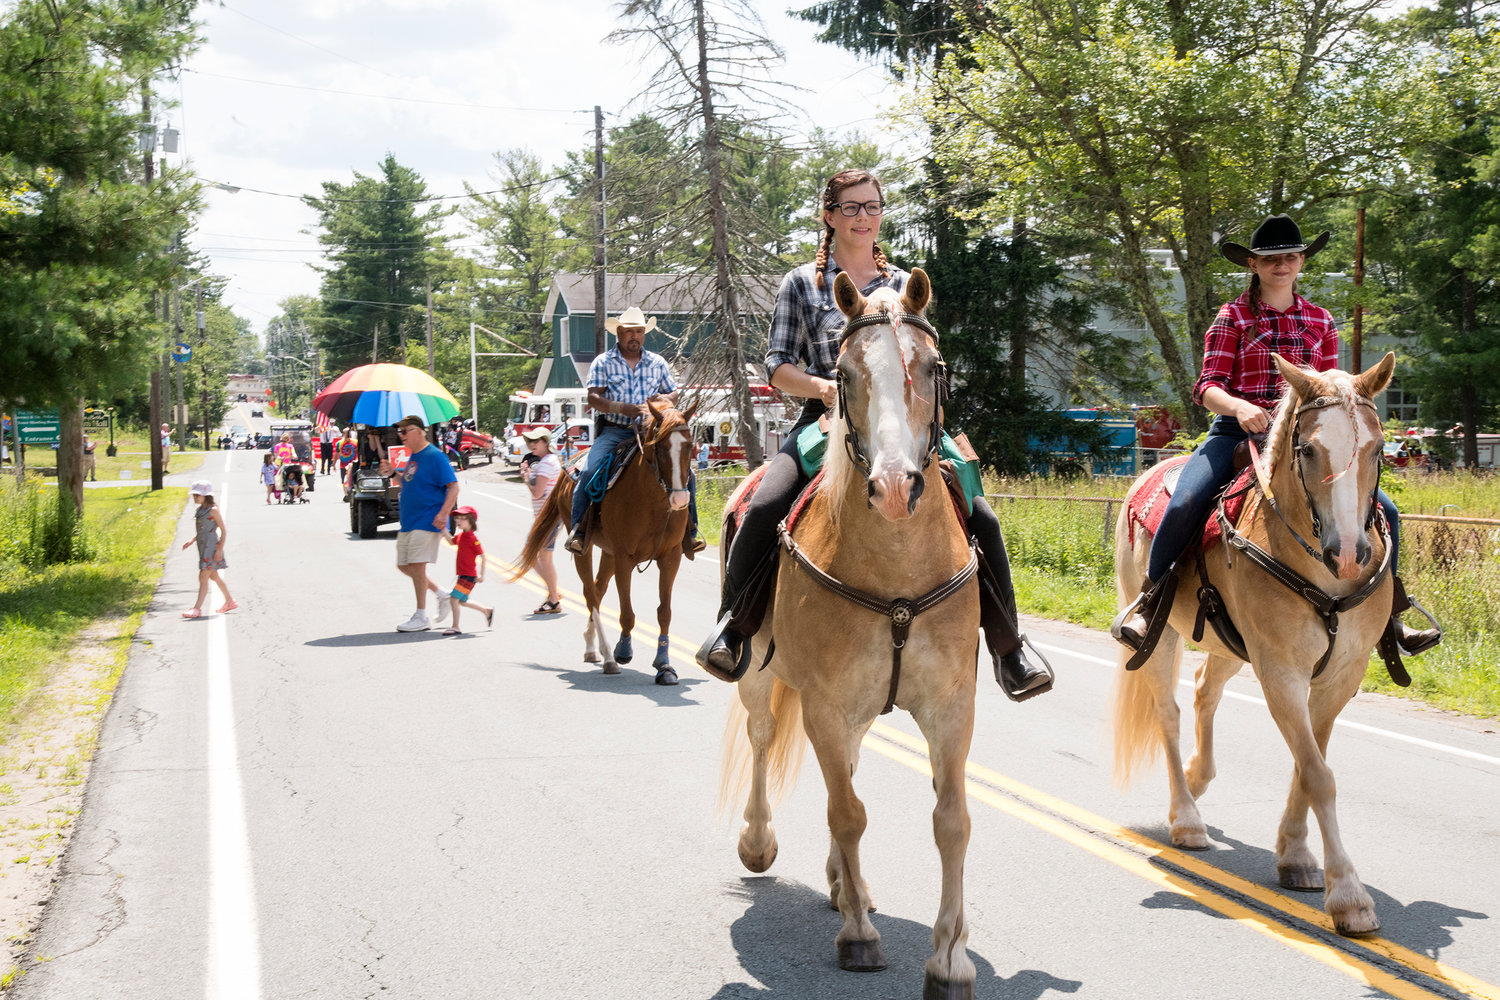 Horses like parades too. Riders from Bethel’s Rolling Stone Ranch hoofed it over to join the march.